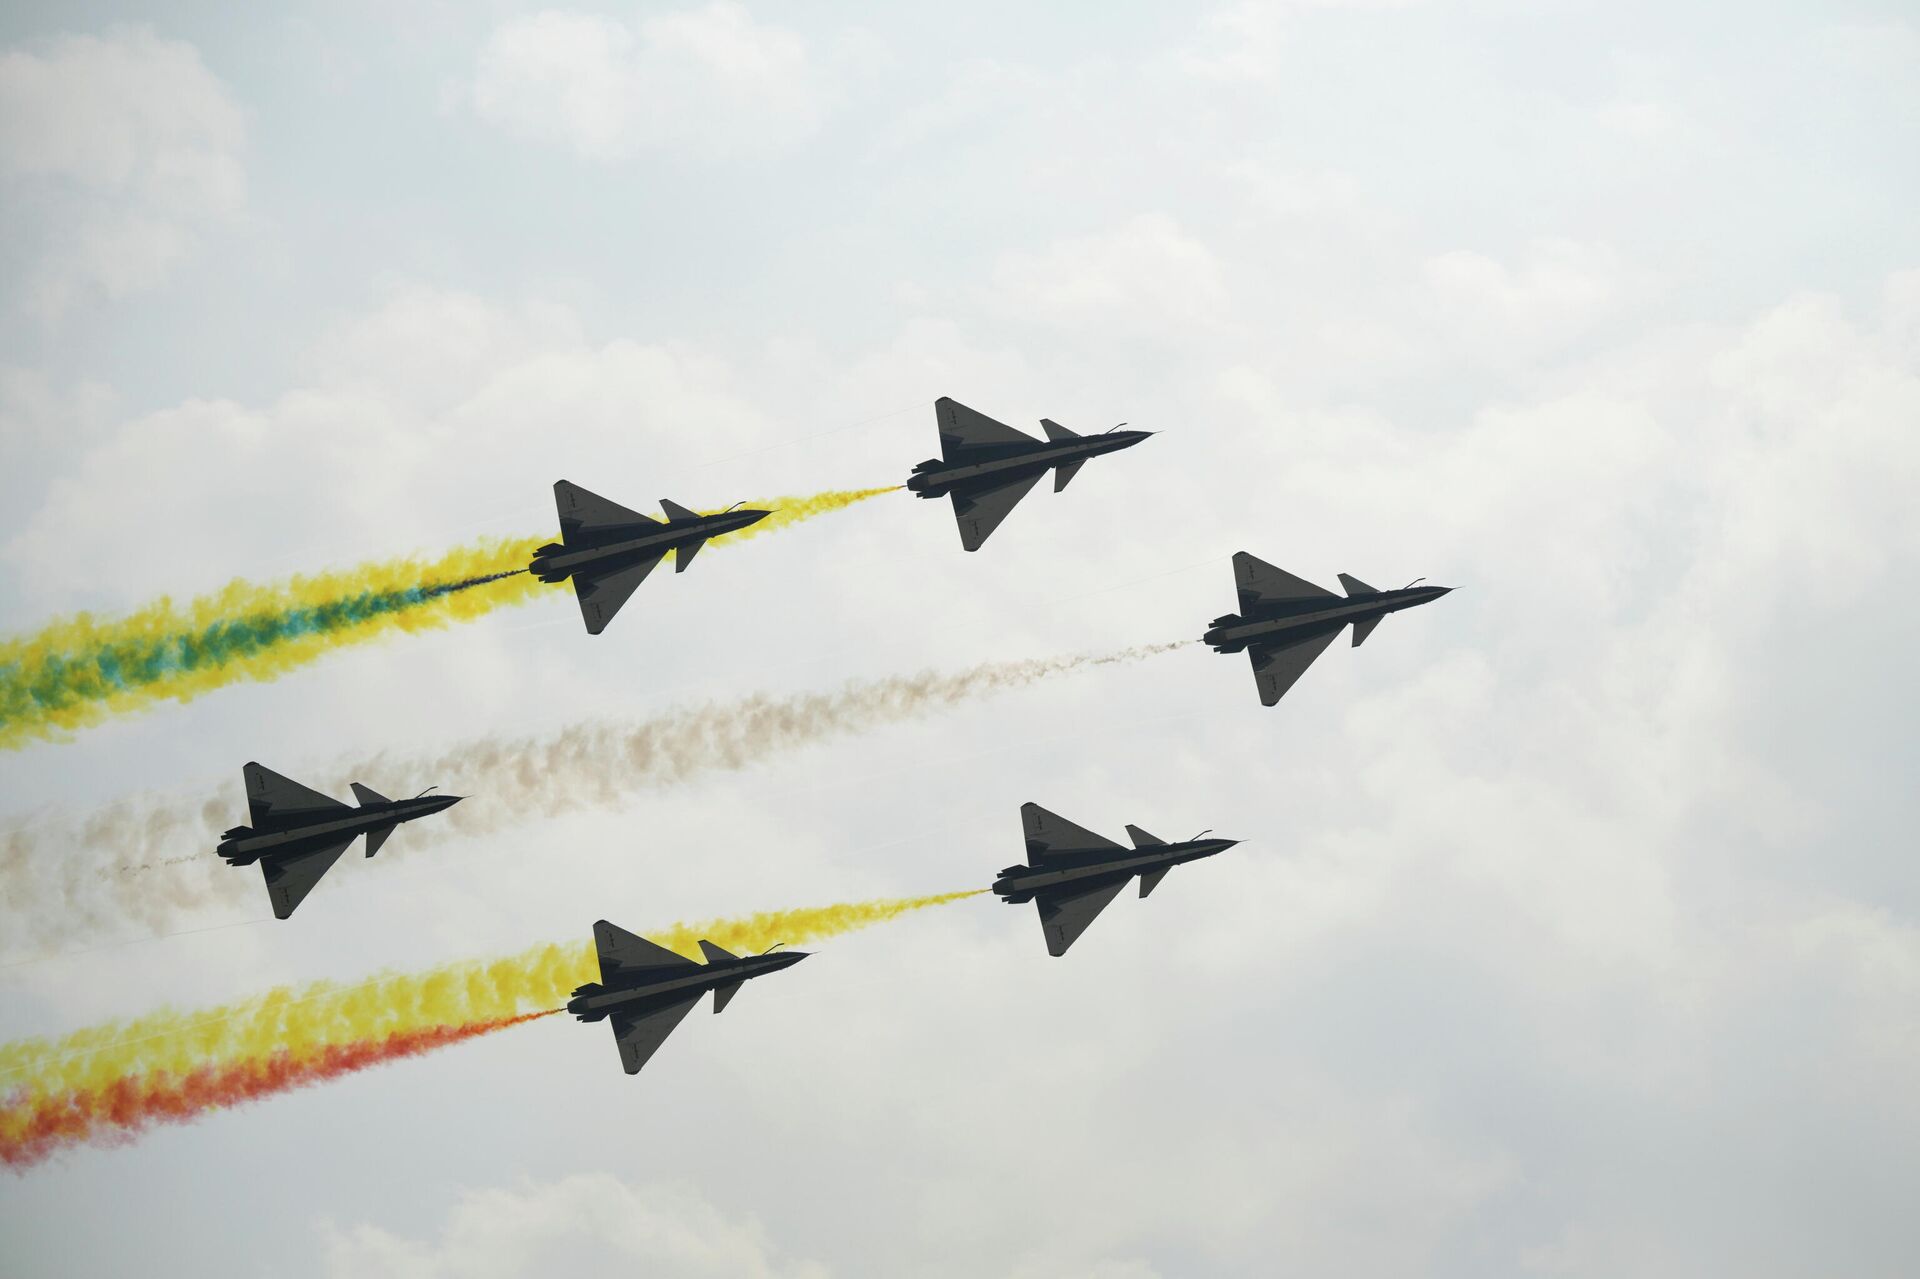 Jets of Chinese People's Liberation Army (PLA) Air Force Bayi aerobatic team perform at the China International Aviation and Aerospace Exhibition, or Airshow China, in Zhuhai, Guangdong province, China September 28, 2021 - Sputnik International, 1920, 29.09.2021